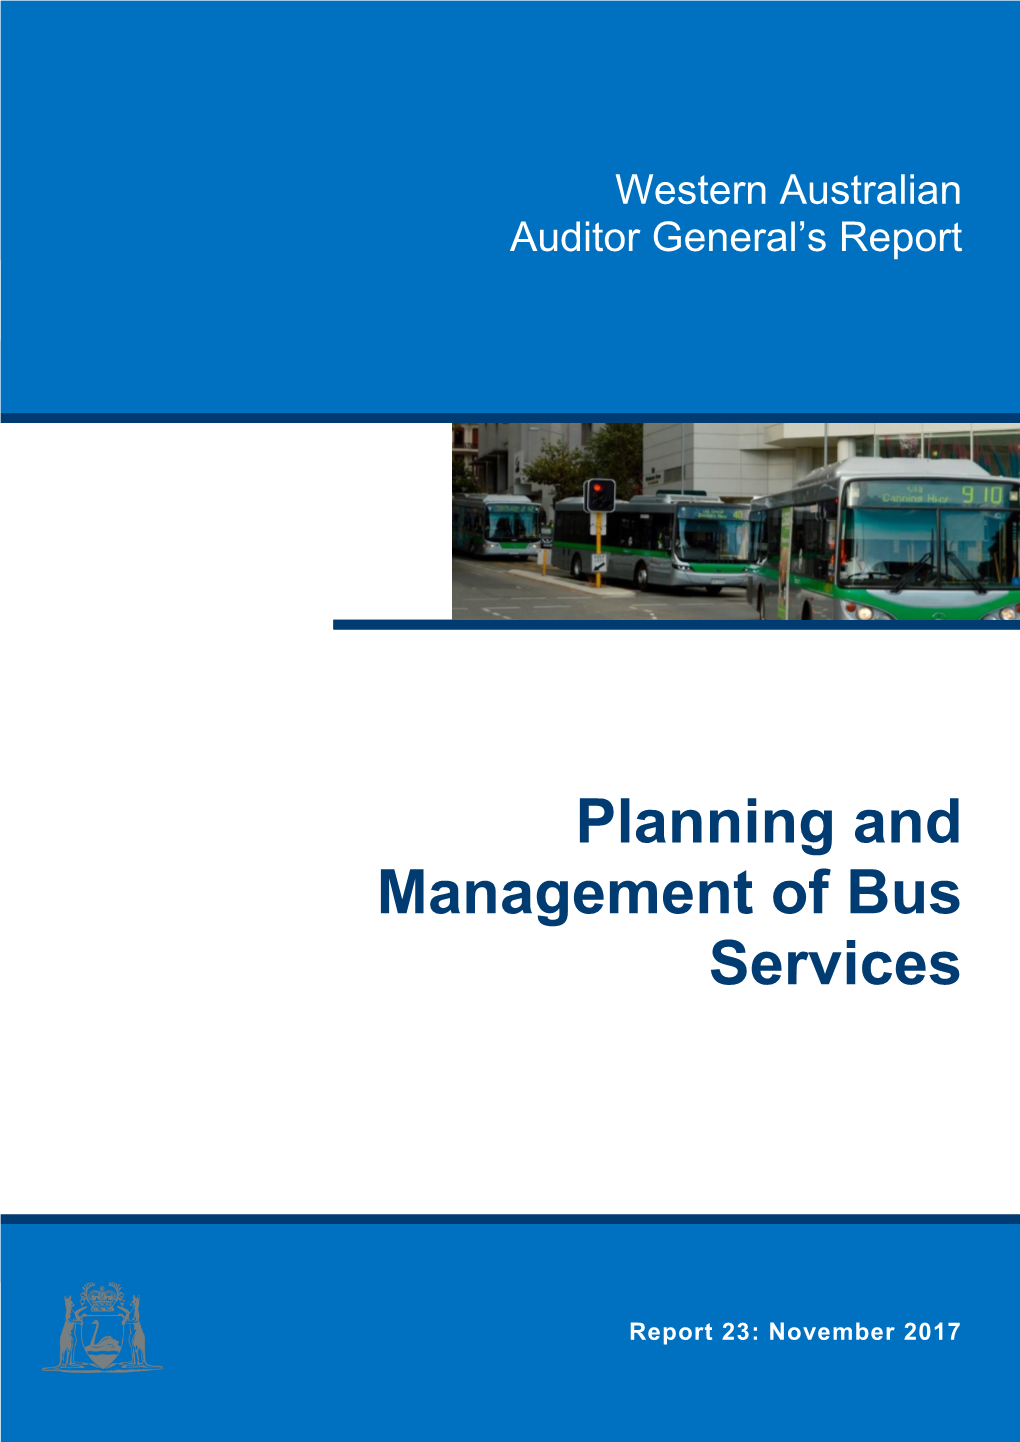 Planning and Management of Bus Services